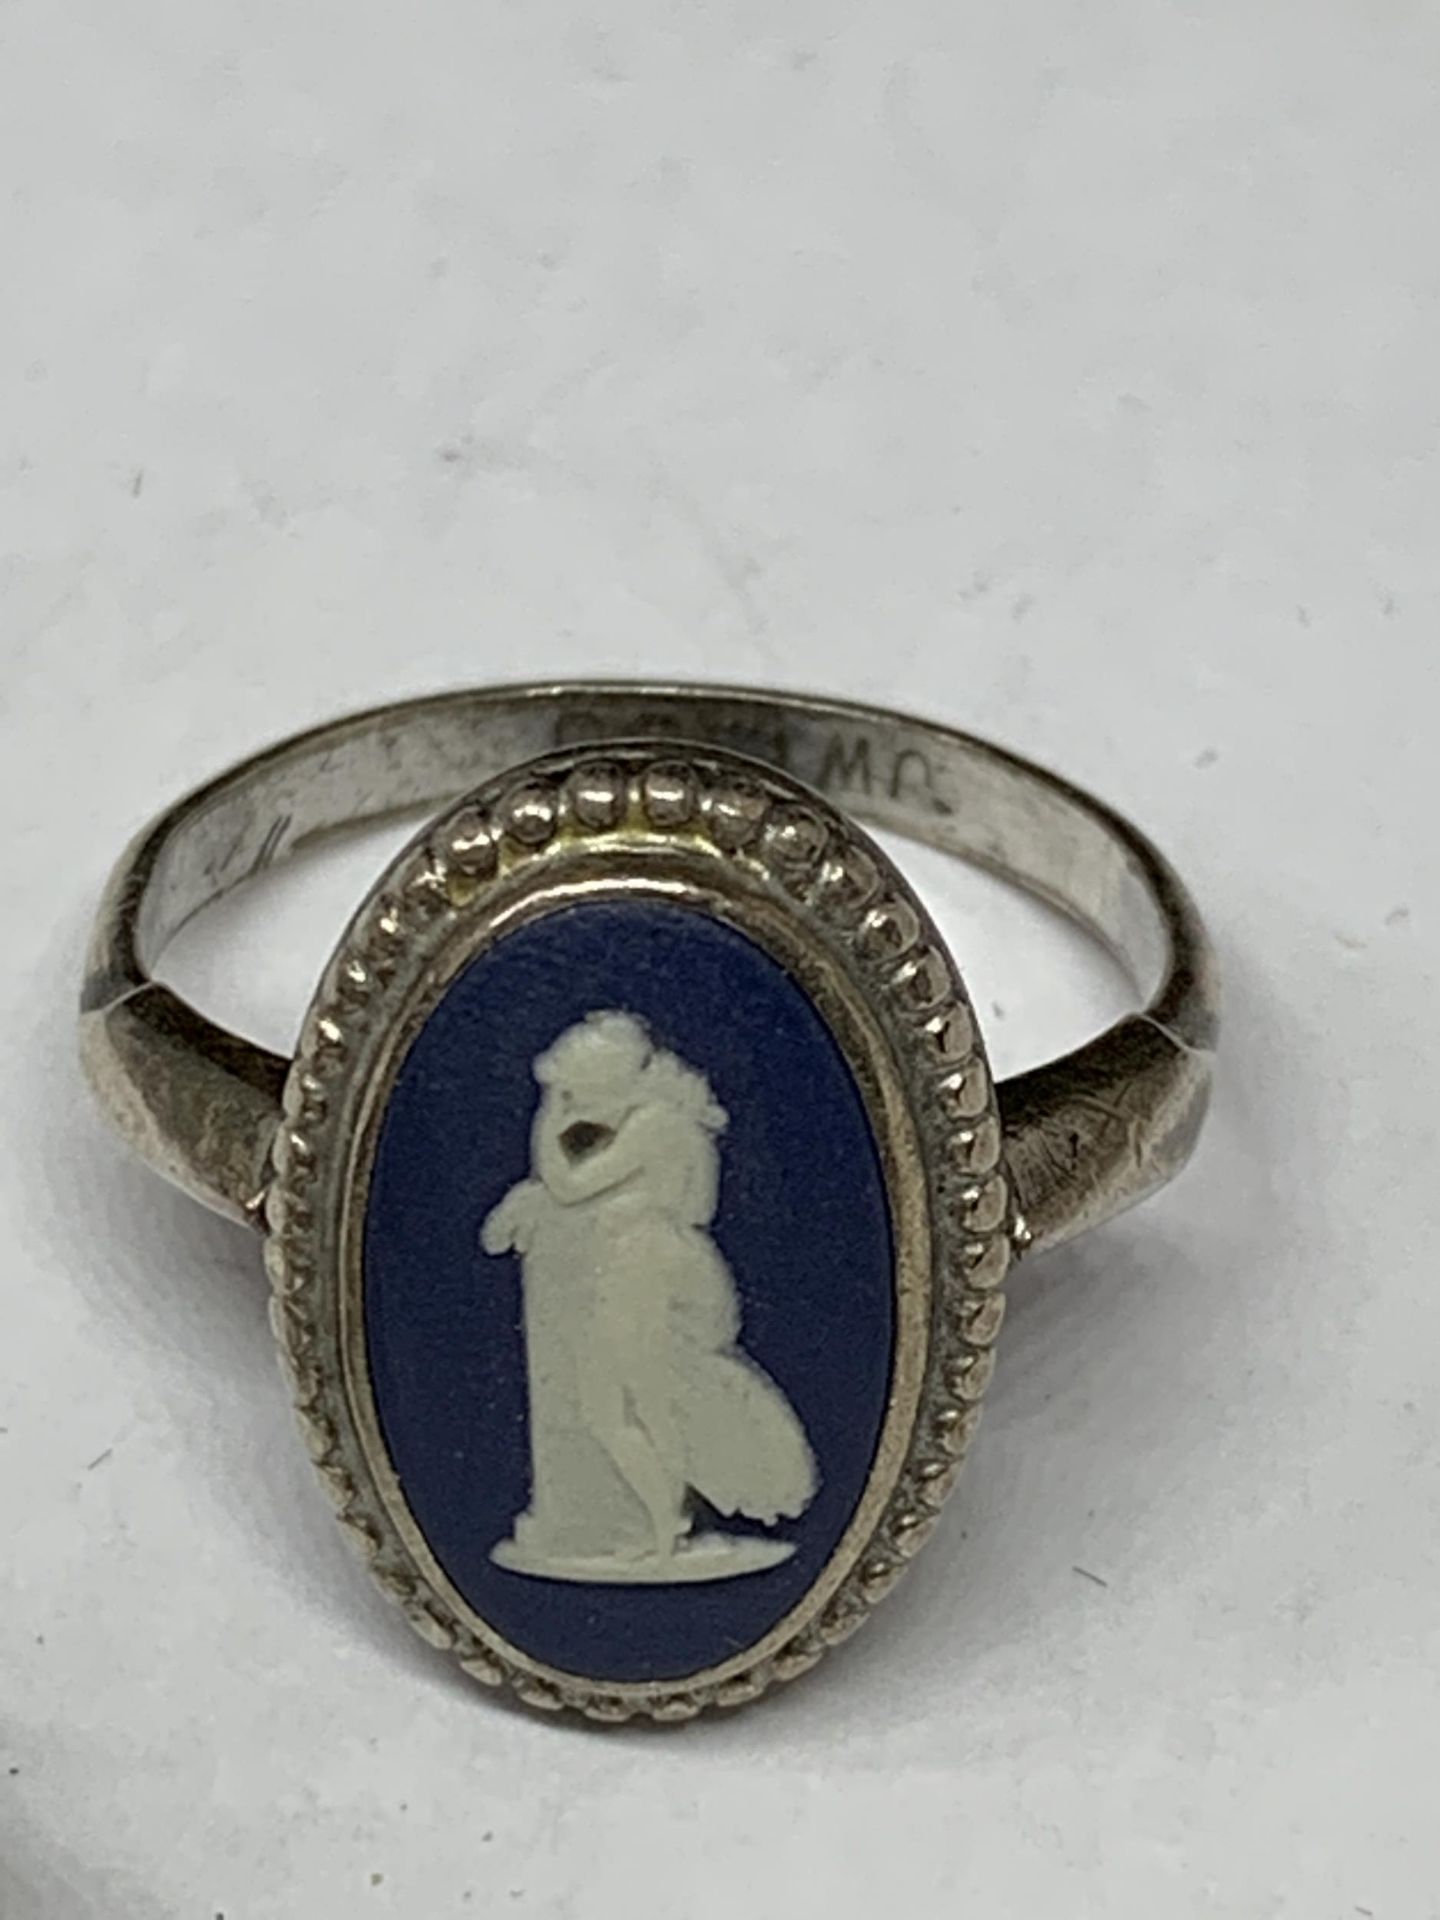 A SILVER BLUE WEDGWOOD JASPERWARE RING SIZE Q/R AND A SILVER BUTTERFLY BROOCH - Image 2 of 3